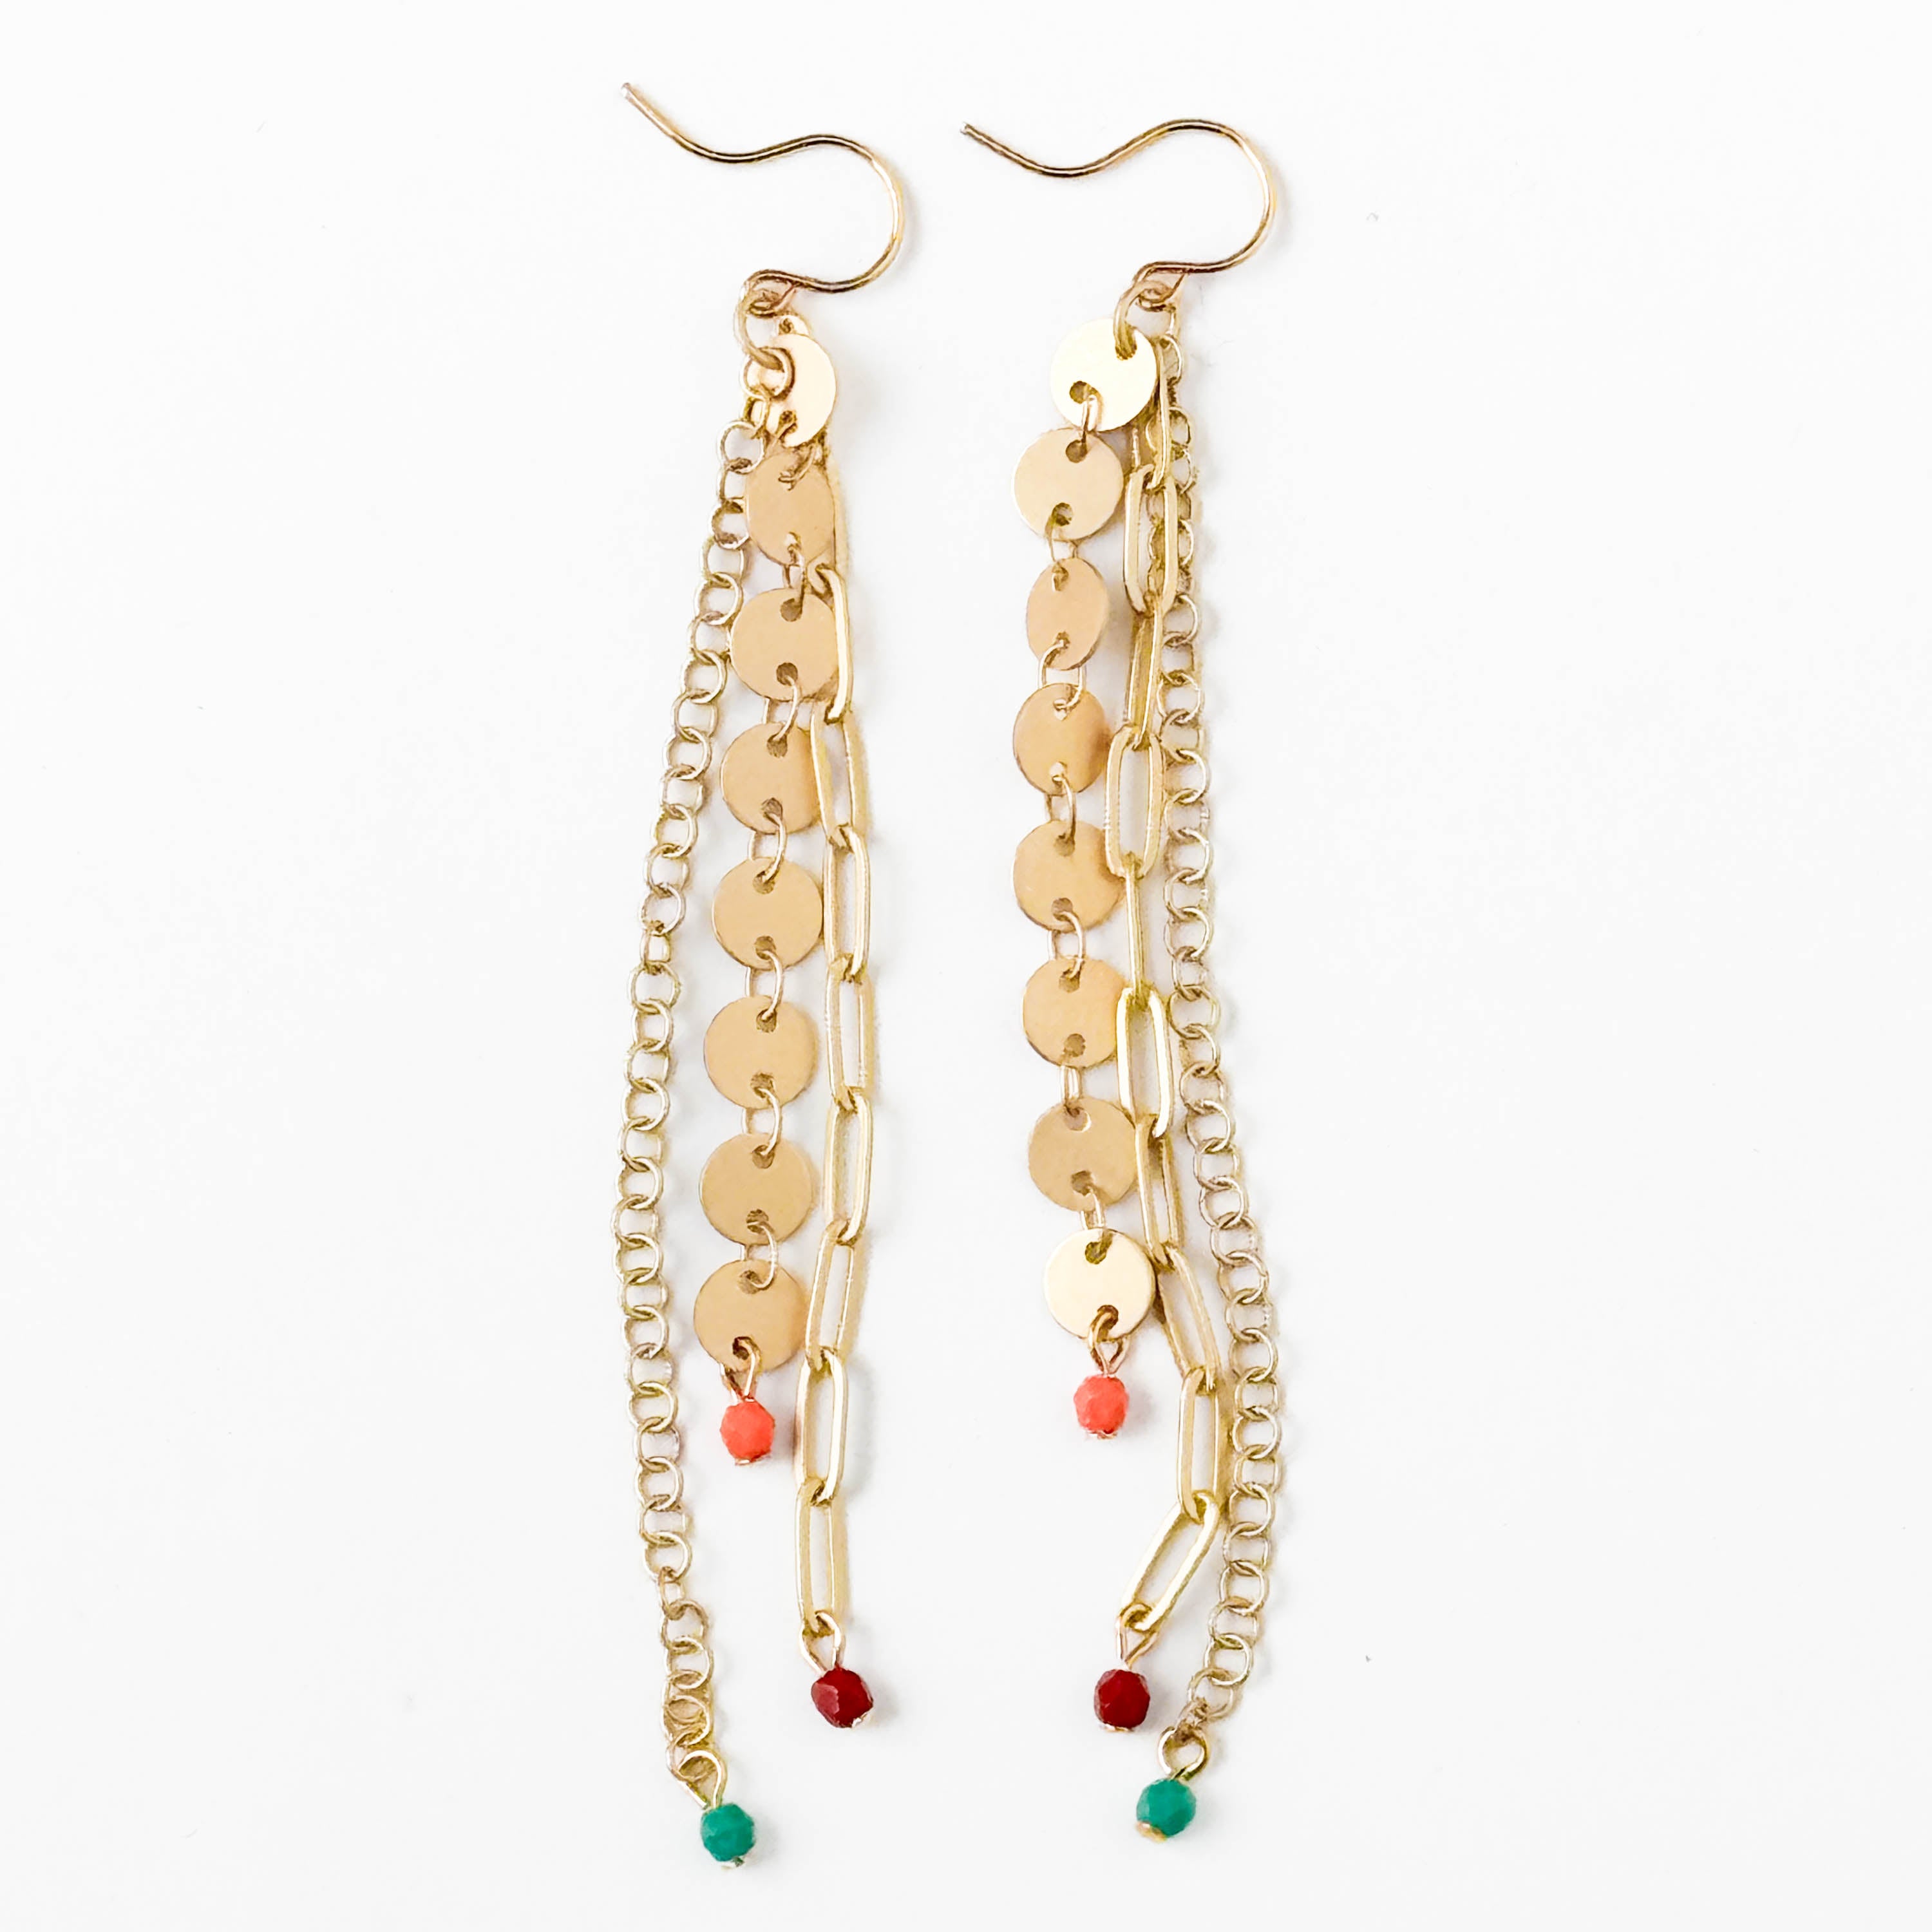 Long Gold Chain Earrings with Tiny Beads